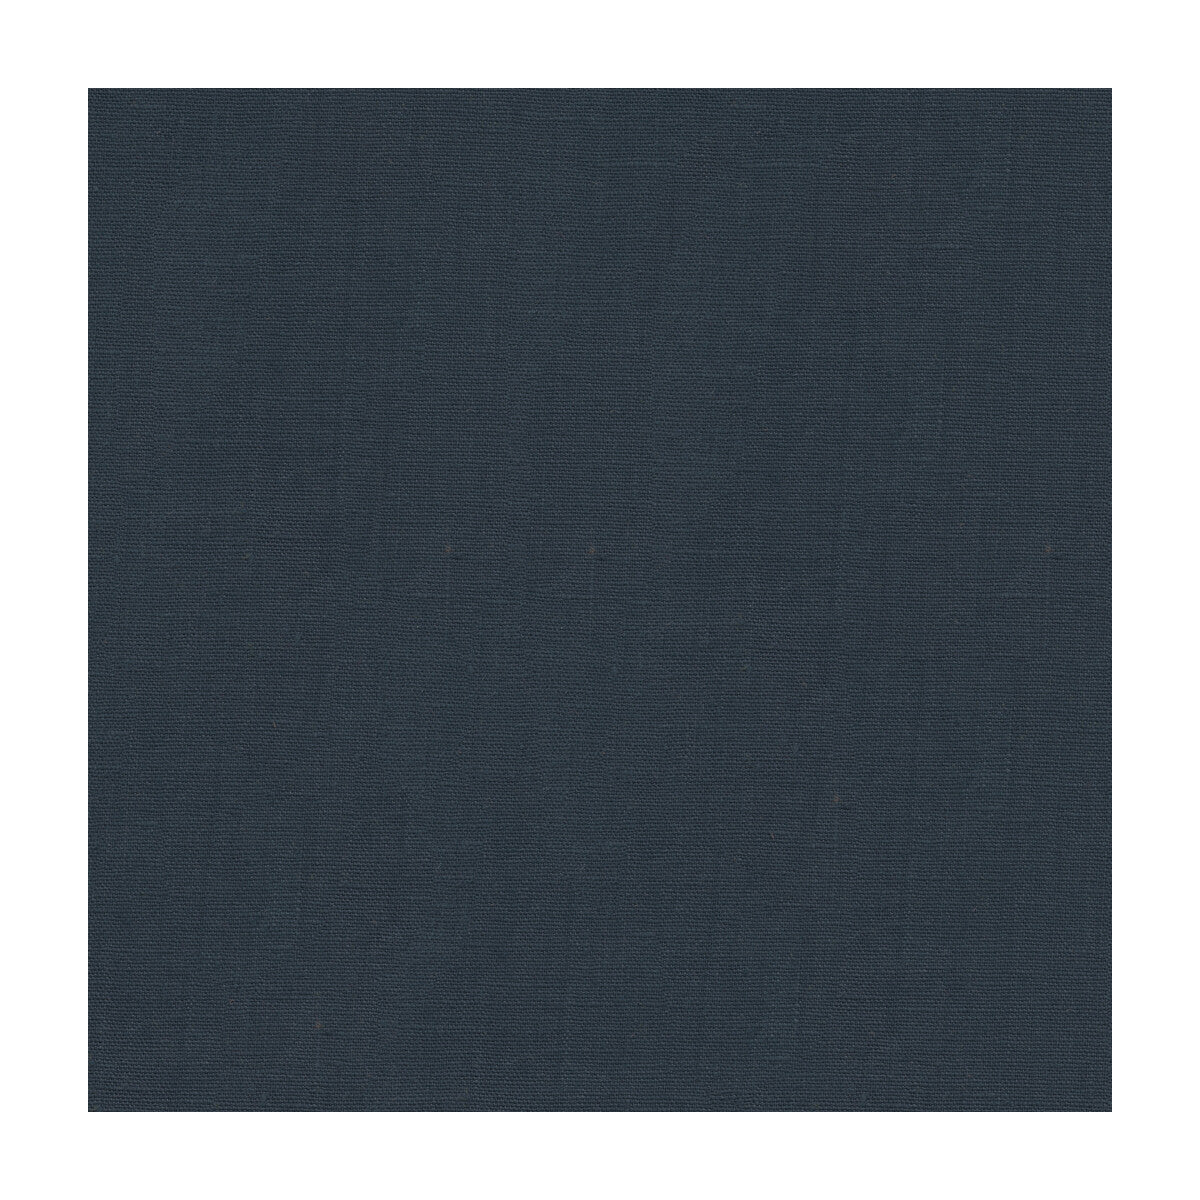 Dublin Linen fabric in navy color - pattern 2012175.50.0 - by Lee Jofa in the Colour Complements II collection